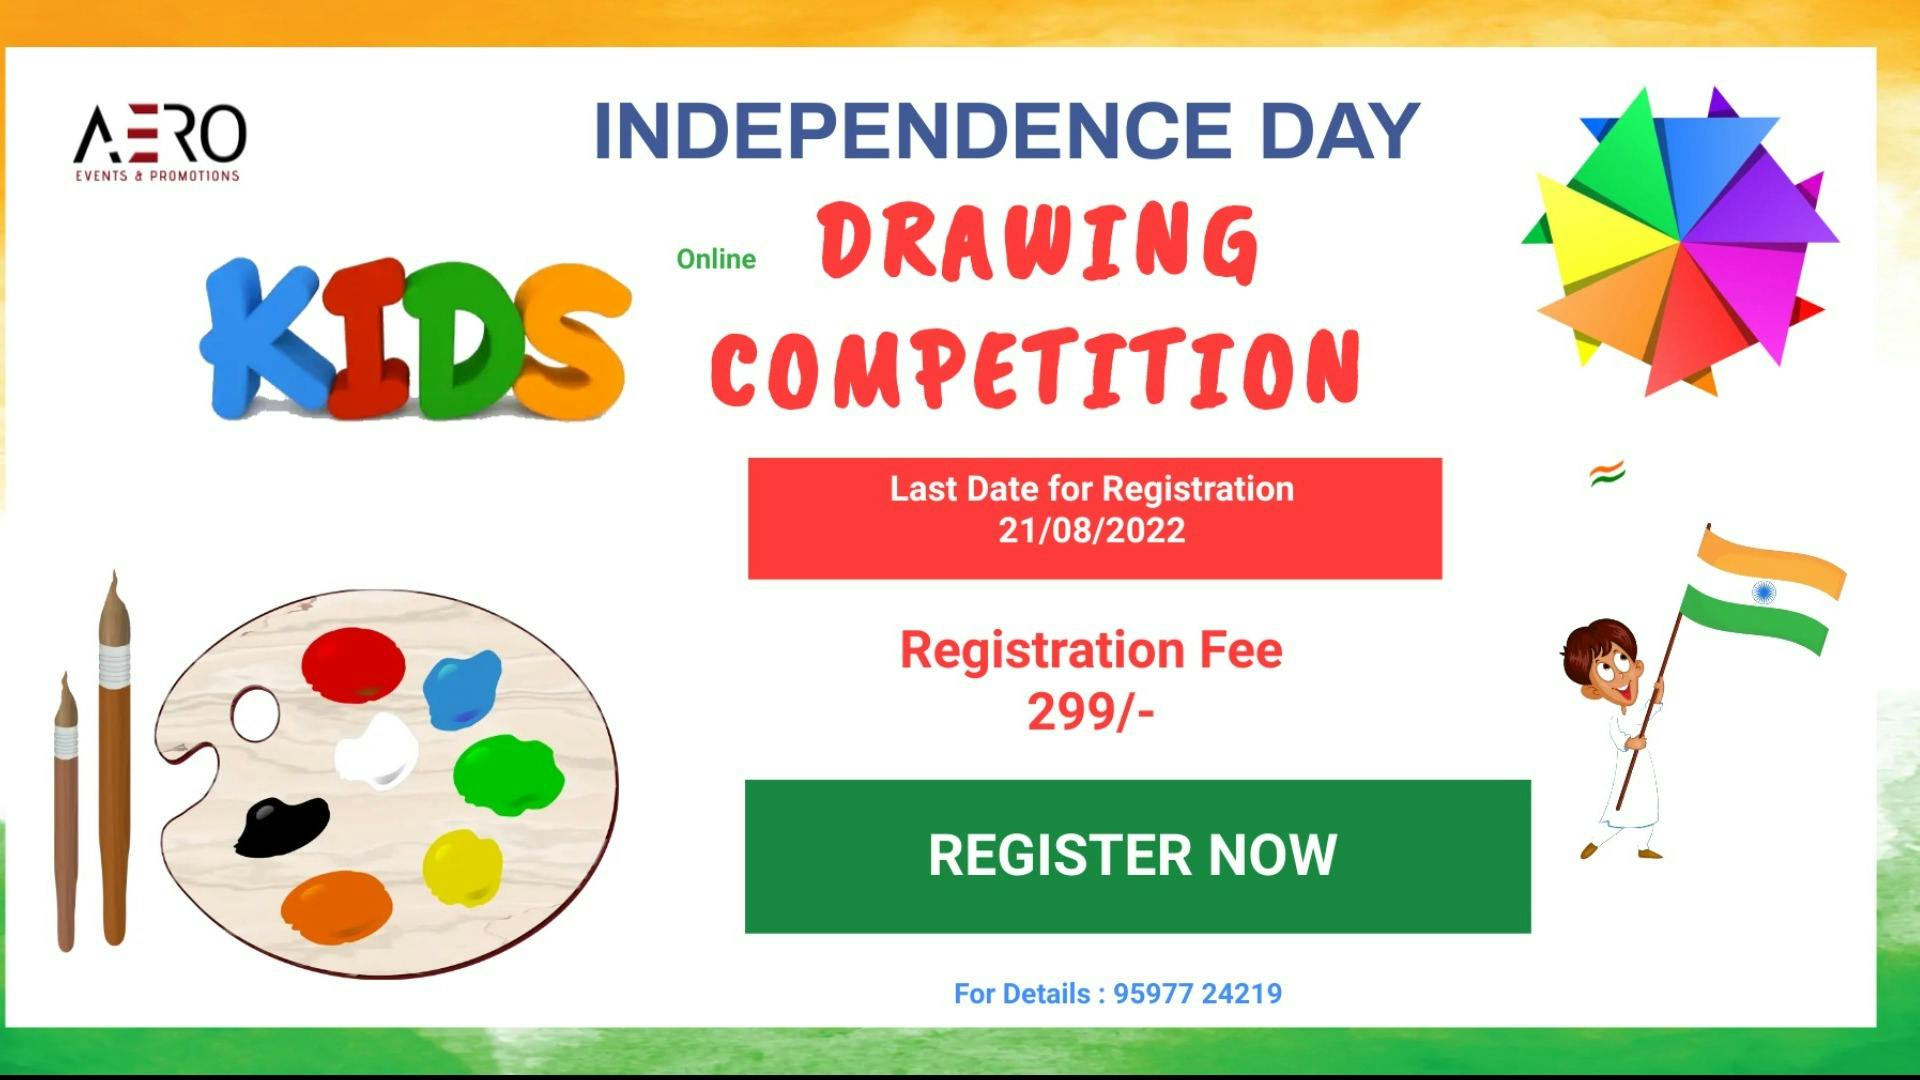 Online Painting Competition organised at kathua - Paigaam